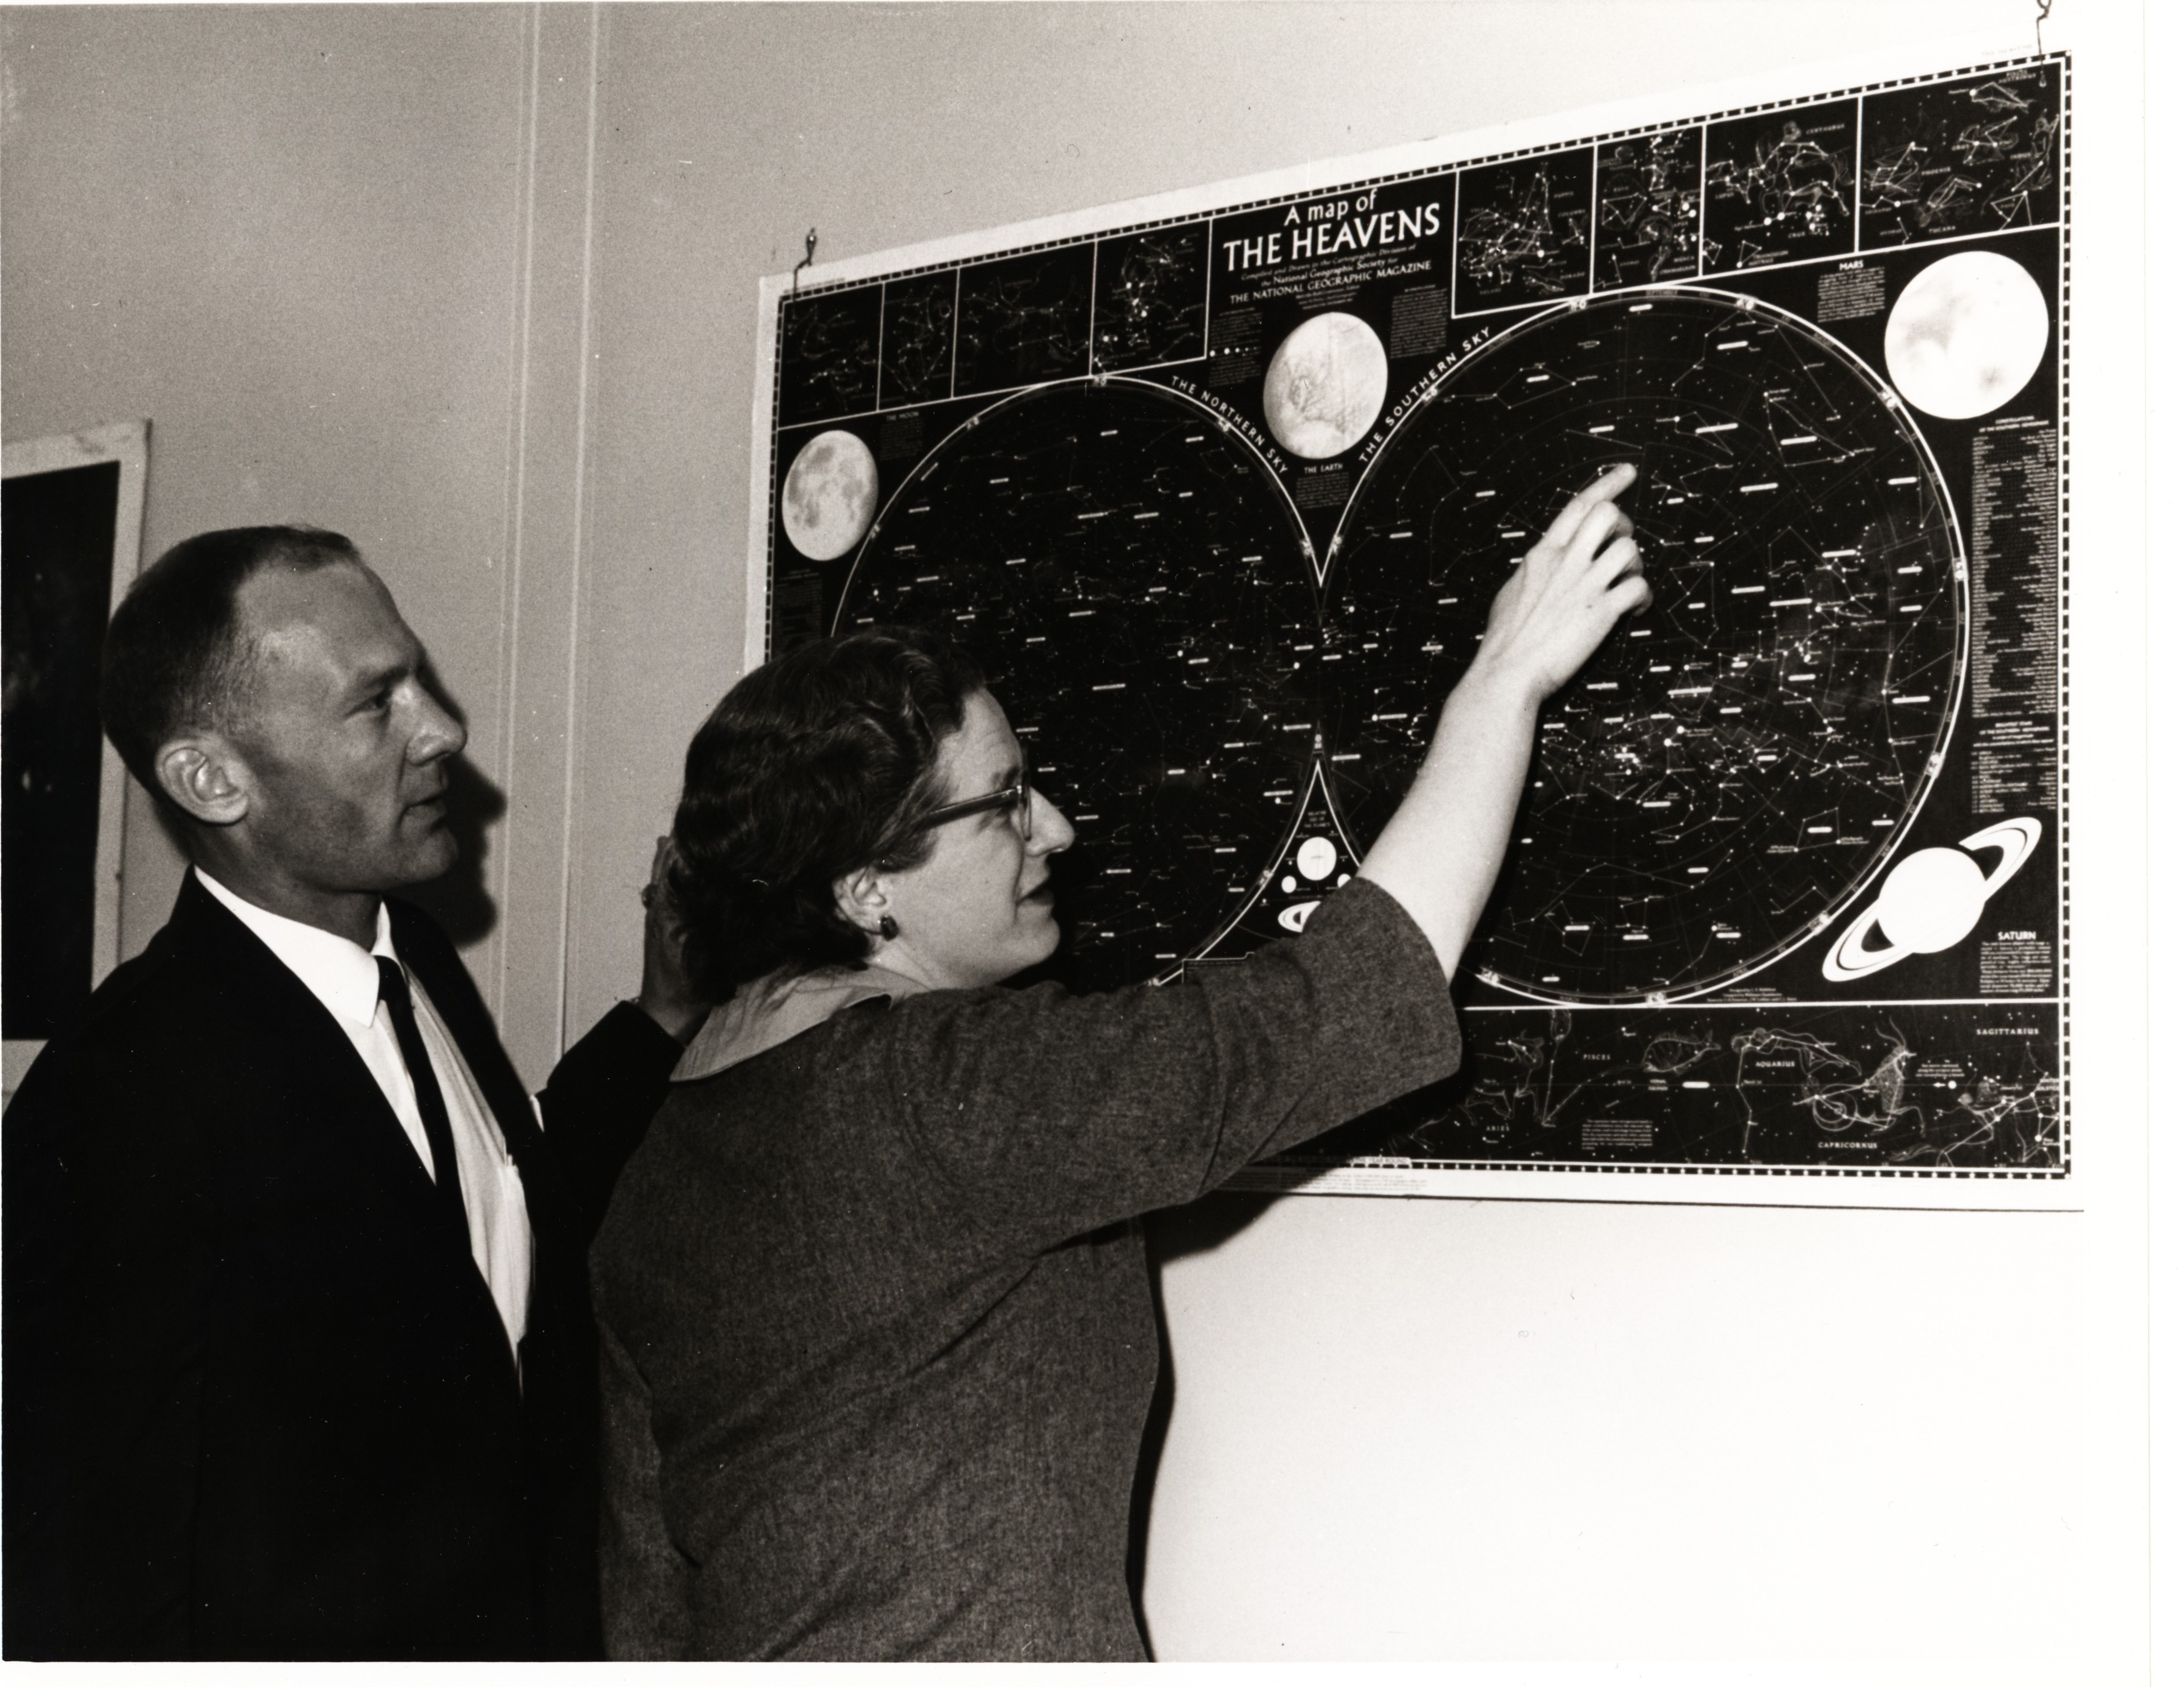 Nancy Grace Roman points on a sky map that is on a wall while Buzz Aldrin looks on.